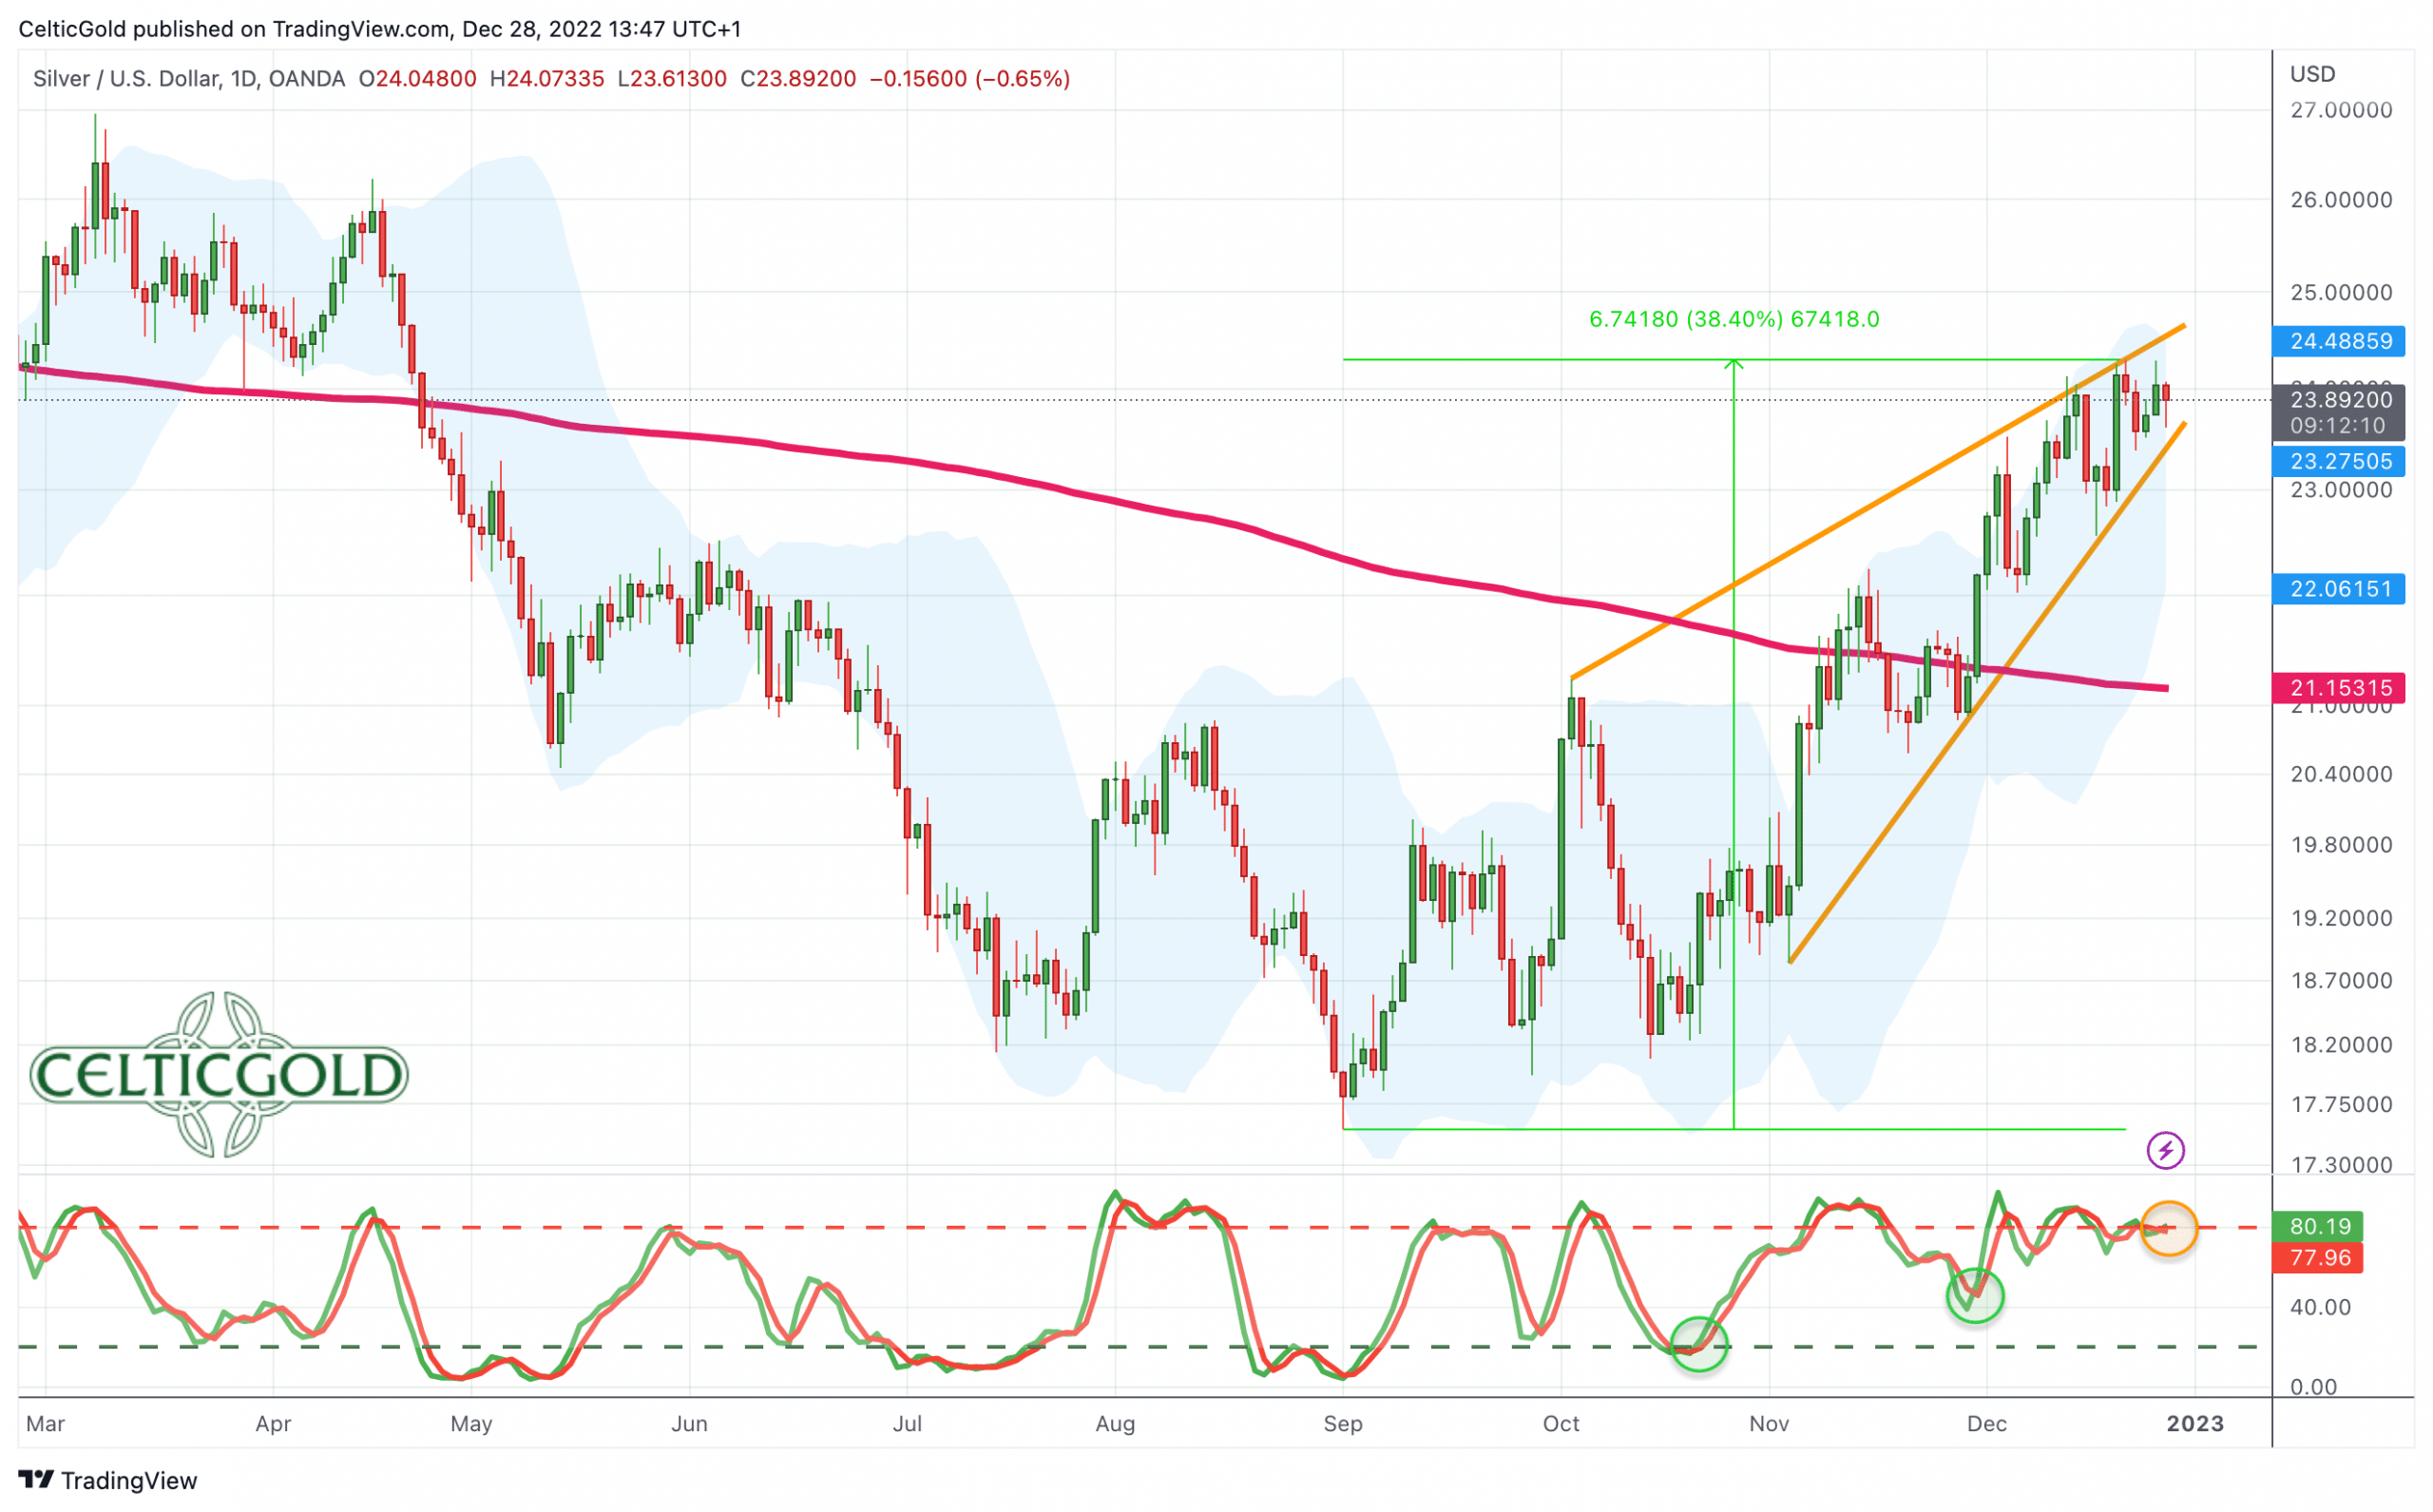 Silver in US-Dollar, daily chart as of December 28th, 2022. Source: Tradingview